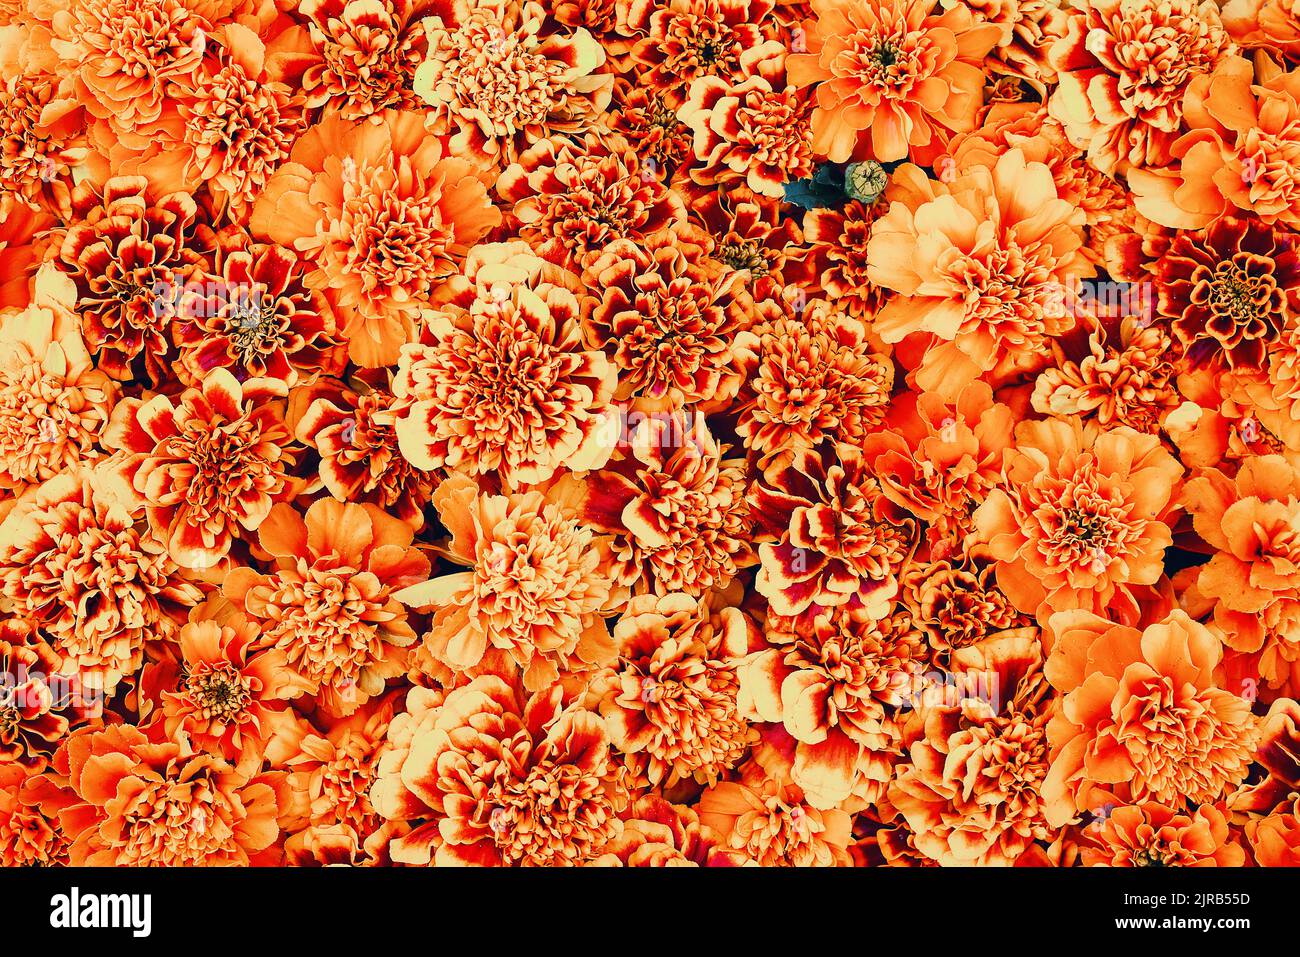 Flowers decoration, orange marigold or tagetes flowers background, flower bed. Top view Stock Photo